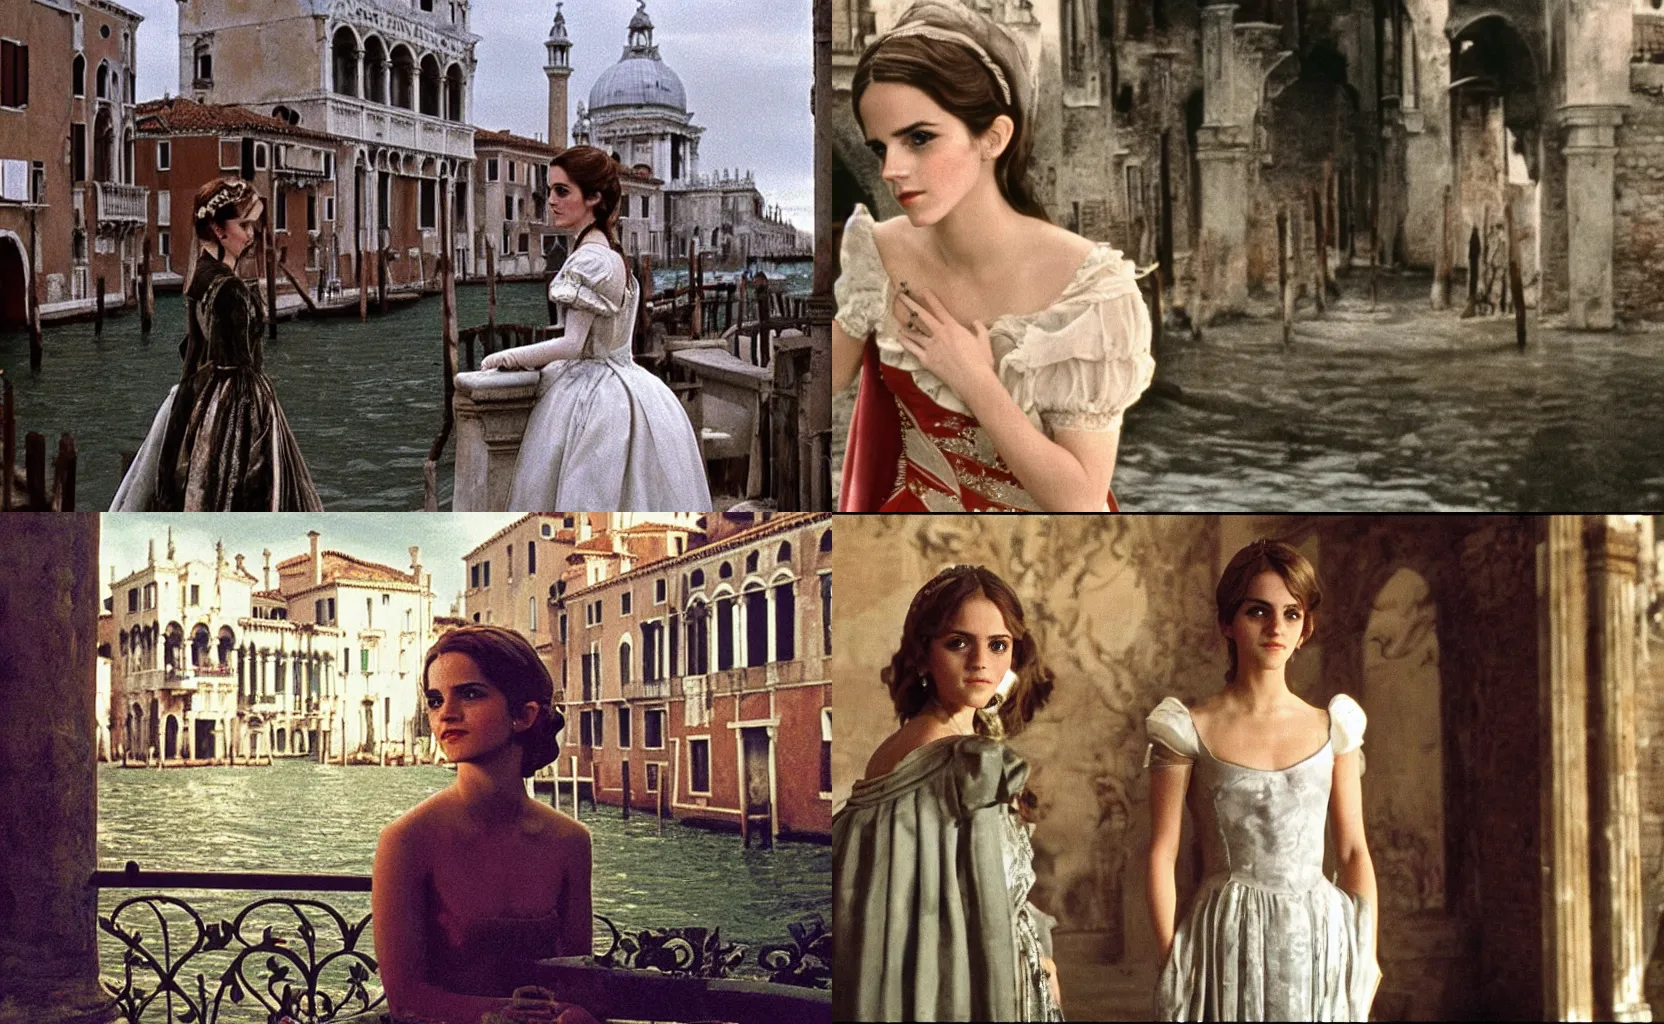 Prompt: scene of pulciana ( 1 9 7 6 ) a film of luchino visconti with a close up emma watson as a duchess. venice and a labyrinth in the background. technicolor, dramatic light, cinematic composition, flamboyant in the style of piranesi